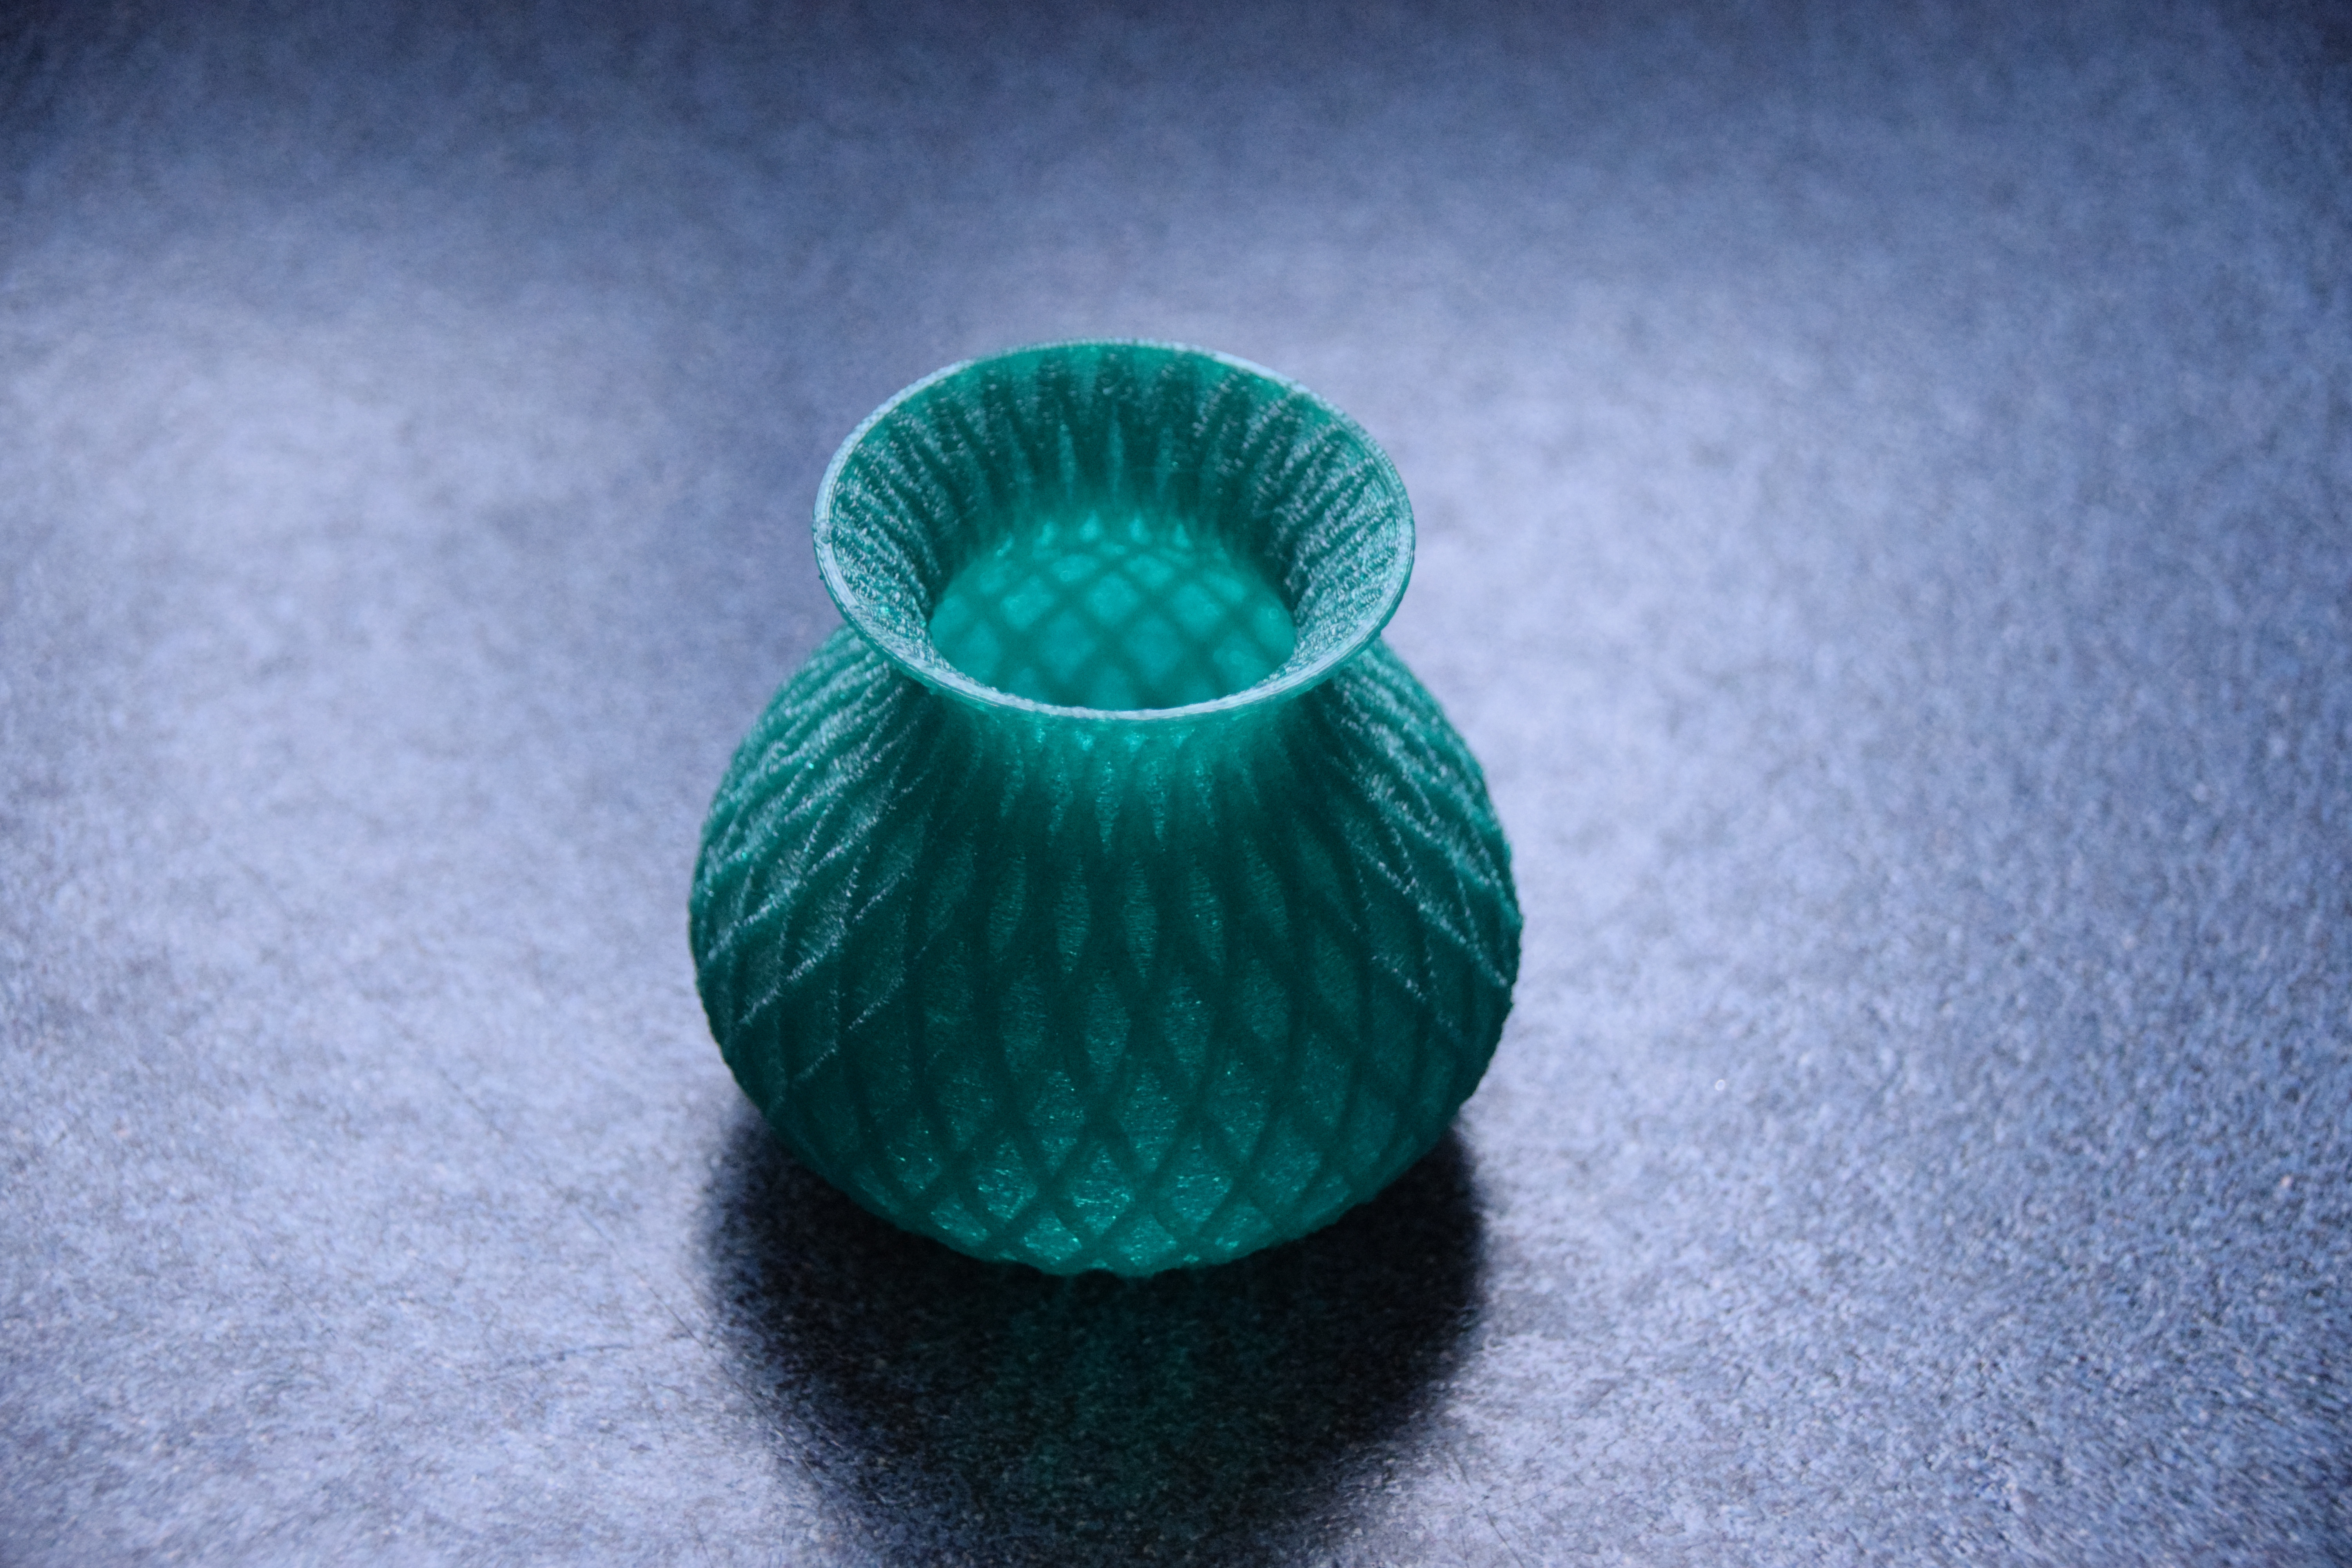 30 Amazing Cheap Turquoise Vases 2024 free download cheap turquoise vases of small vase by bastien thingiverse intended for by bastien may 27 2014 view original